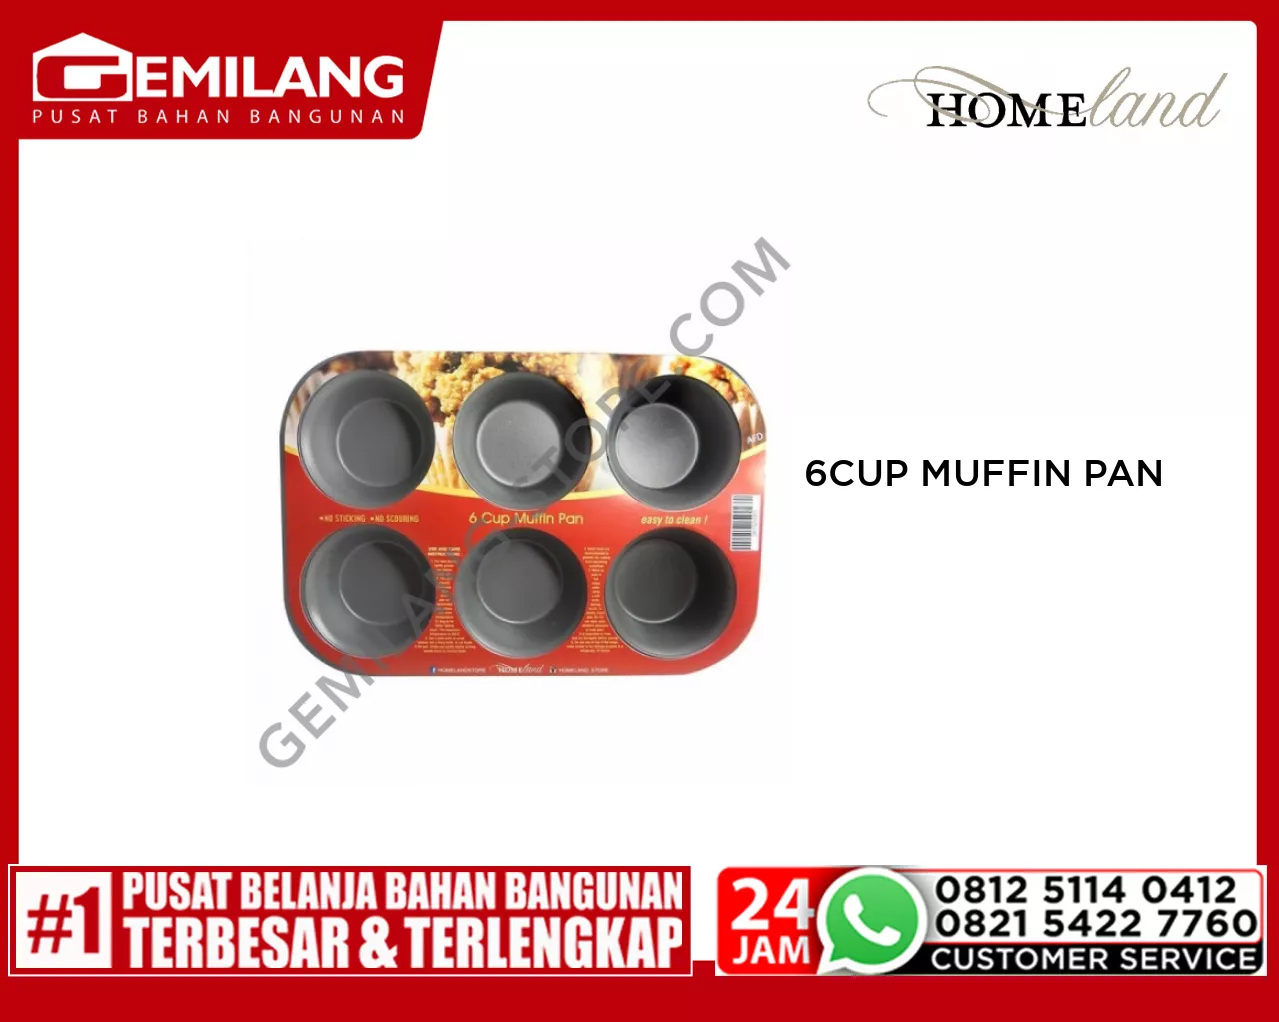 HOMELAND 6 CUP MUFFIN PAN GREY